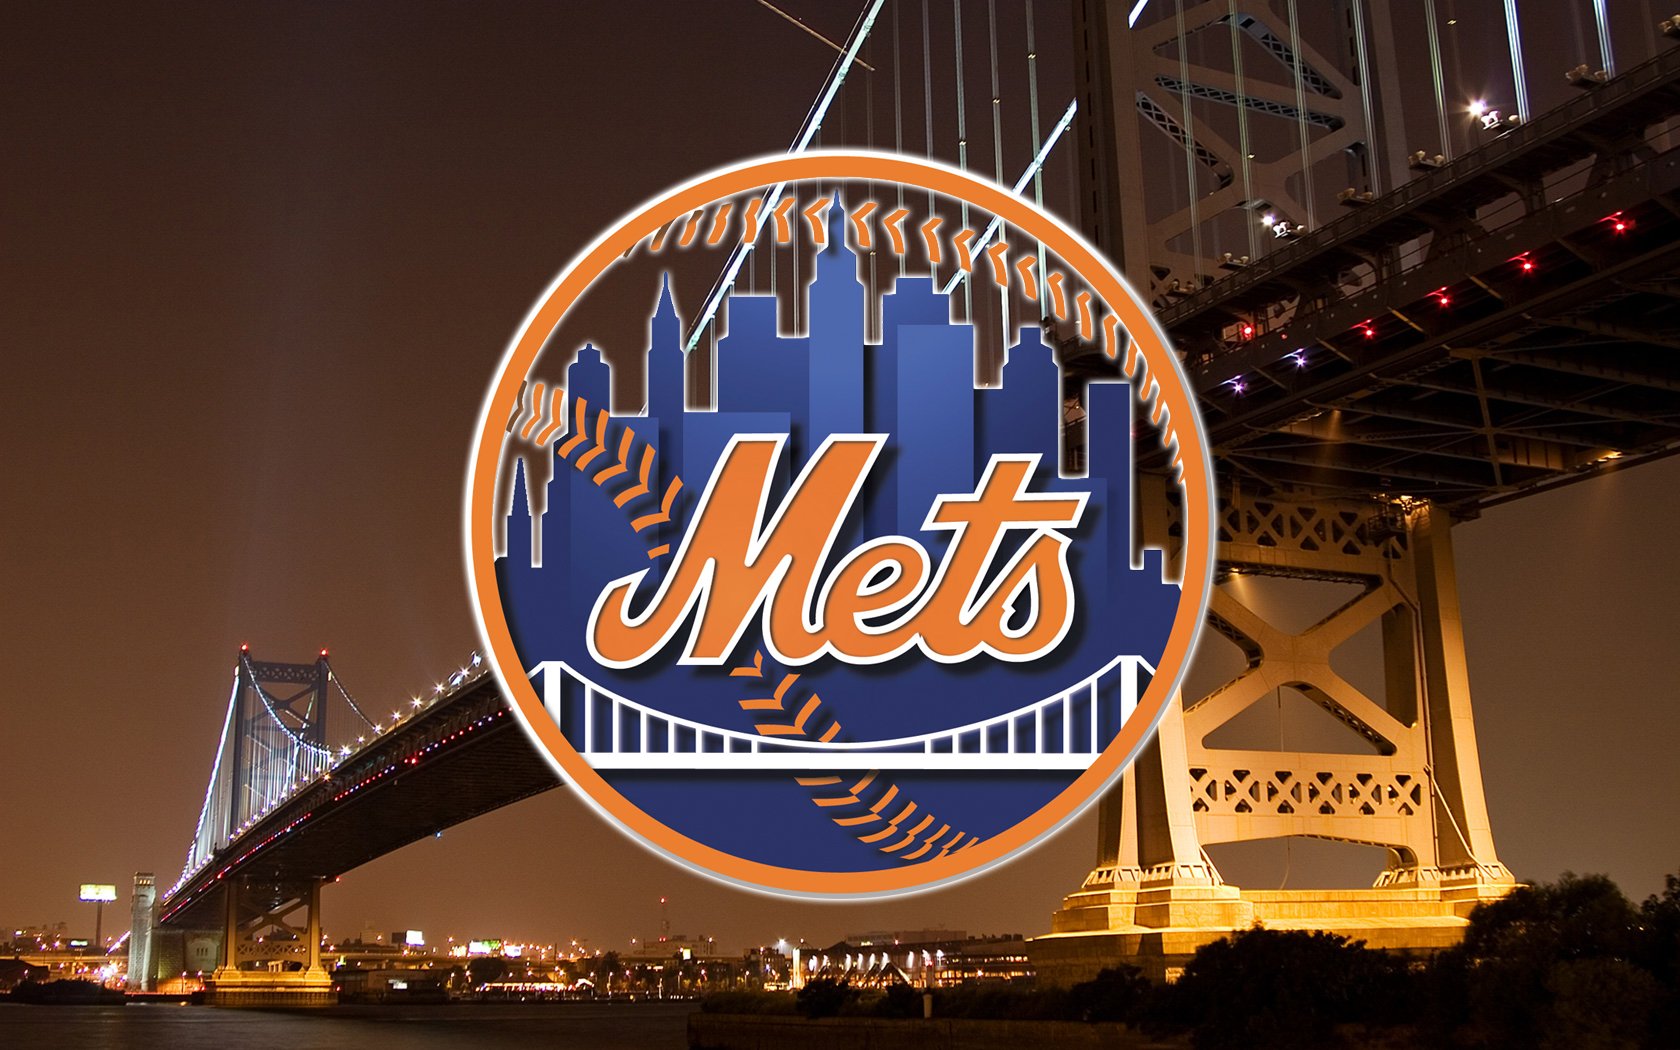  about New York Mets or even videos related to New York Mets